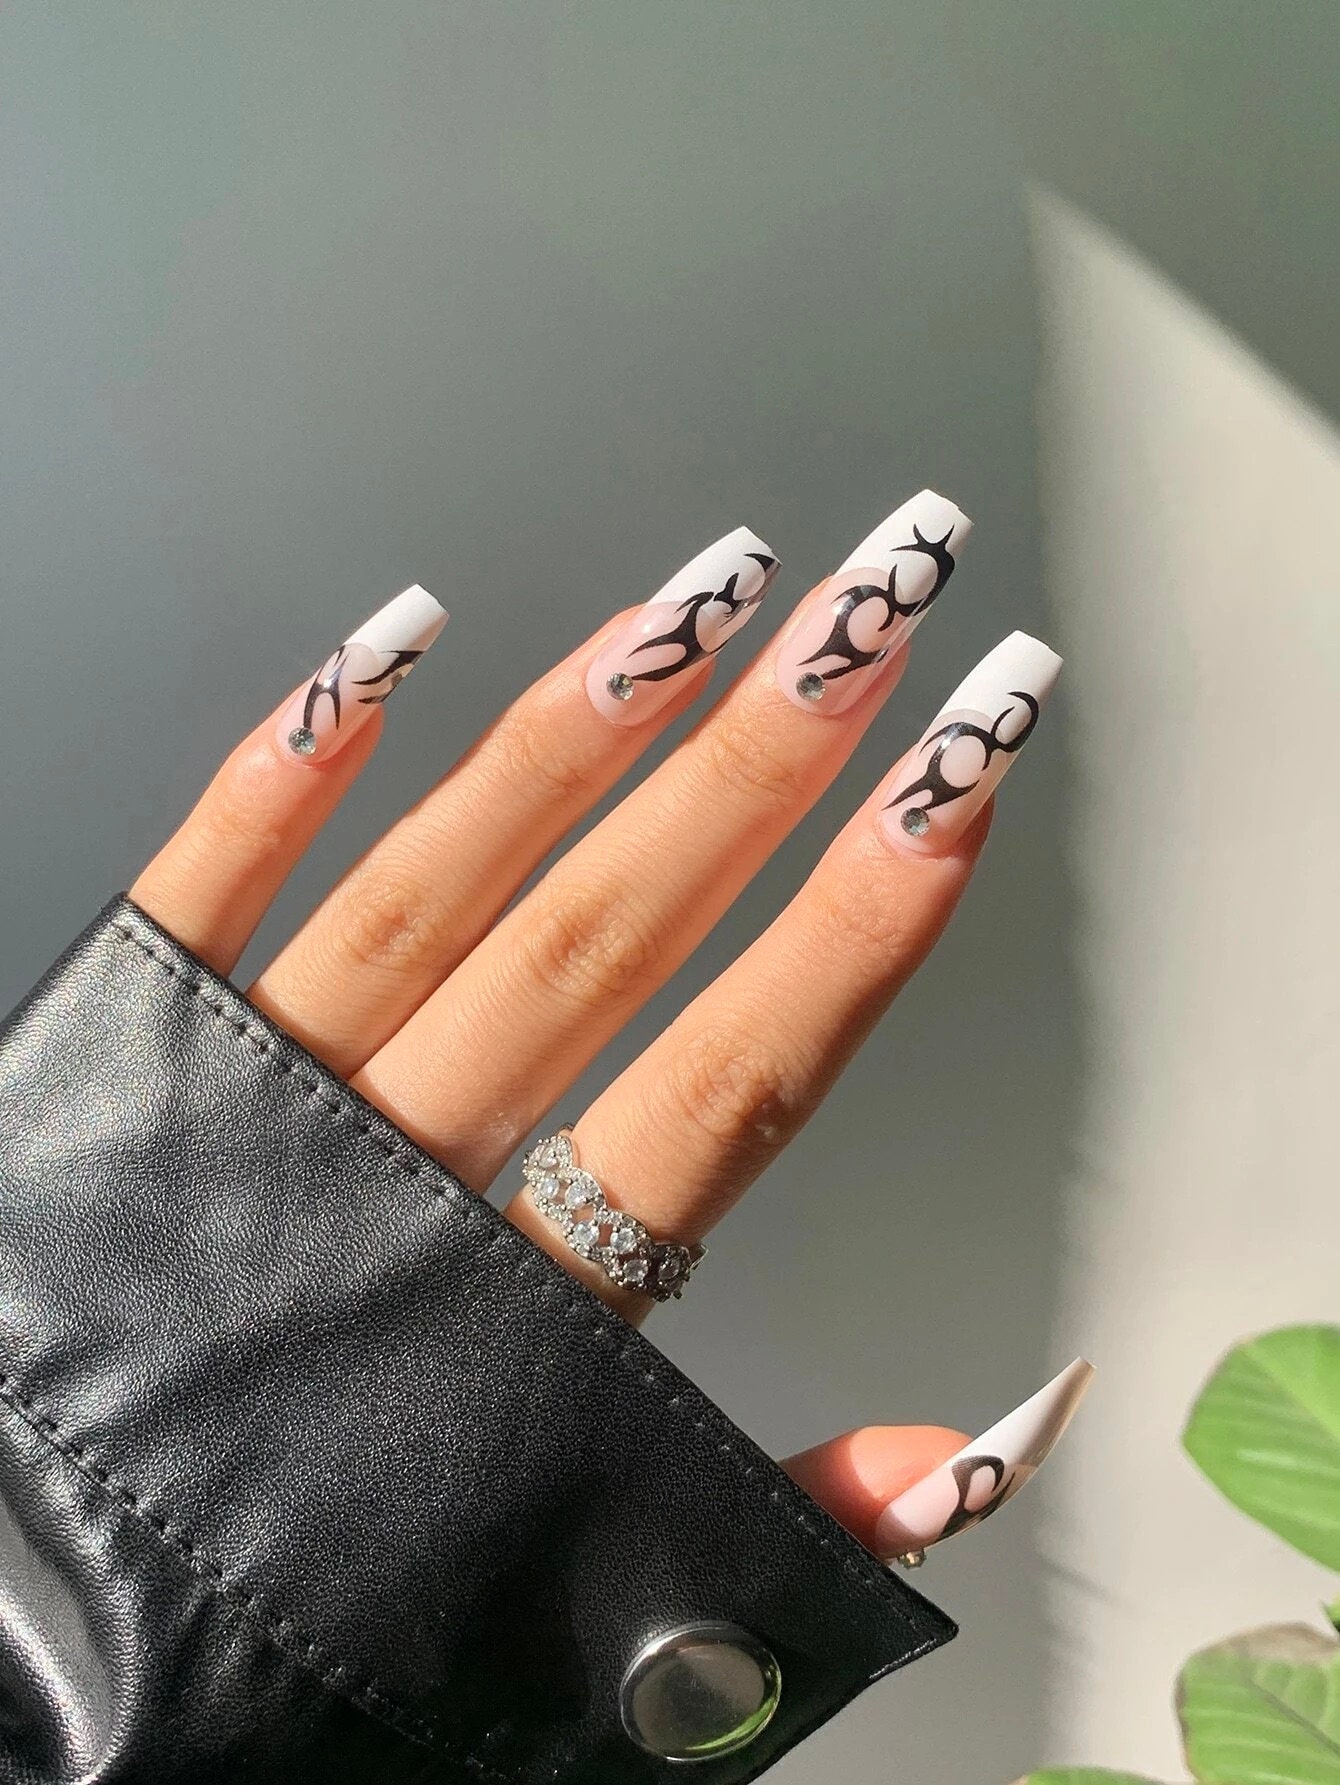 XXL Louis Vuitton Nails, Tapered Square Nails, Pink & White Ombre, 3D  Nail Art